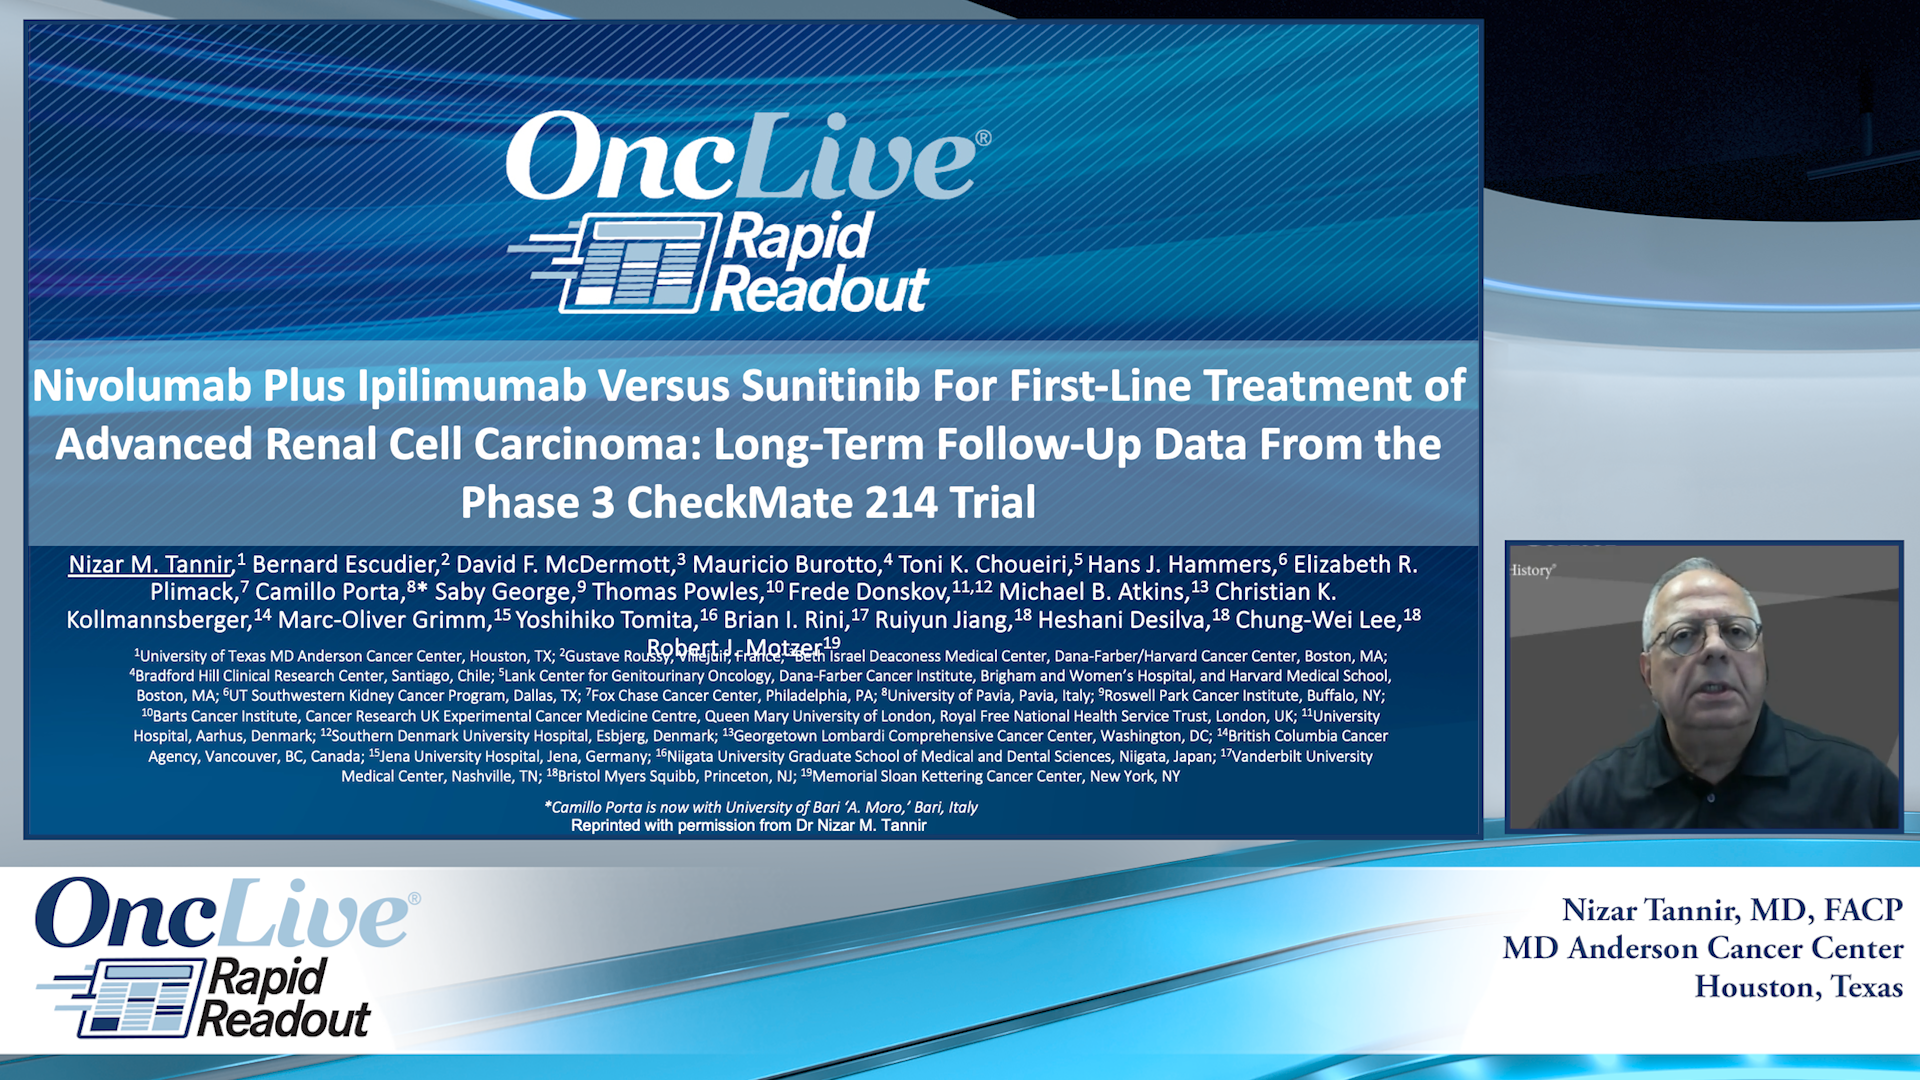 Nivolumab Plus Ipilimumab Versus Sunitinib For First-Line Treatment of Advanced Renal Cell Carcinoma: Long-Term Follow-Up Data From the Phase 3 CheckMate 214 Trial